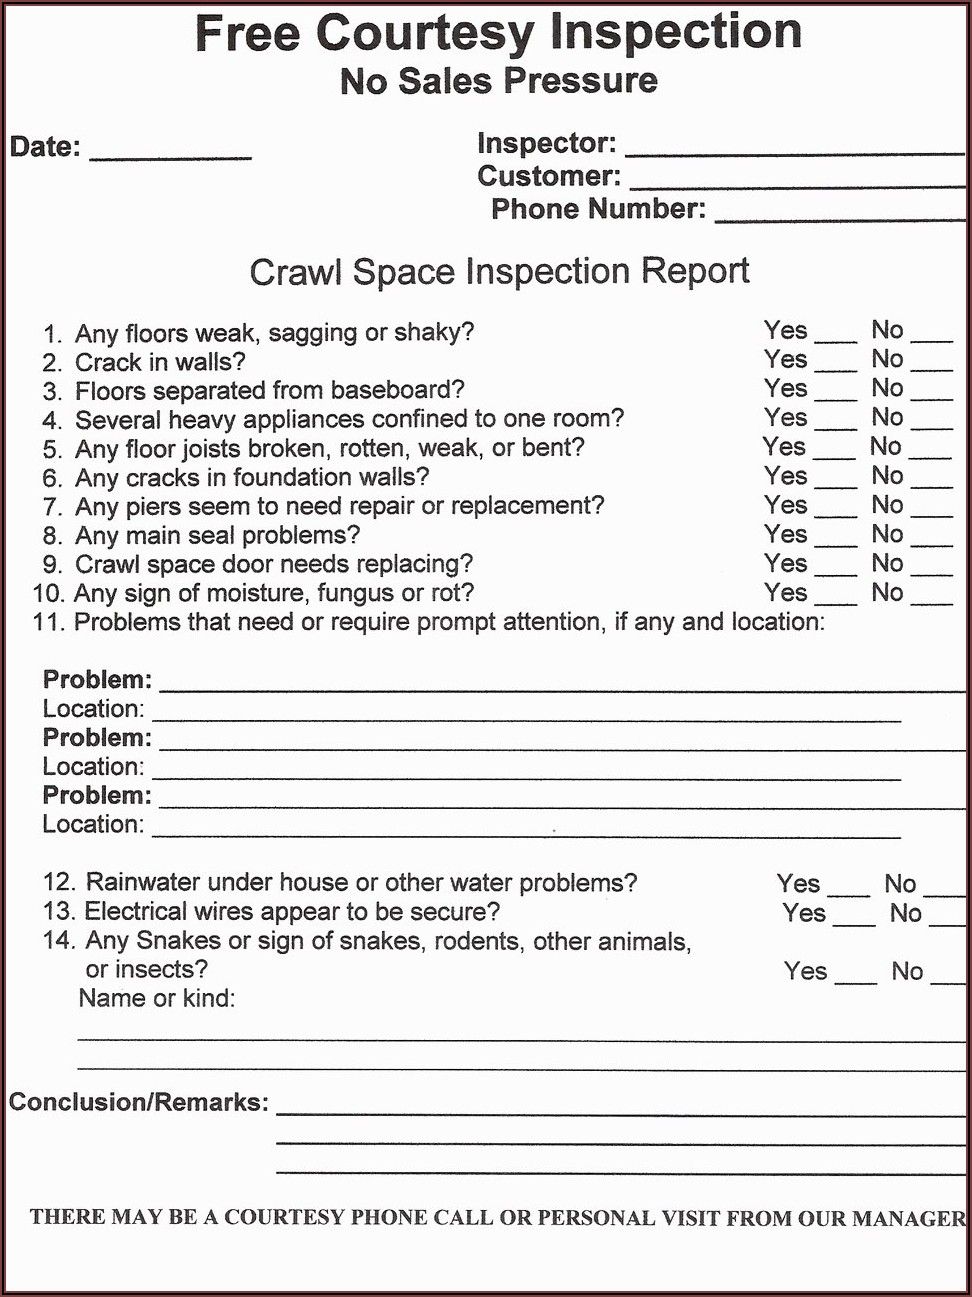 Pest Control Inspection Report Template